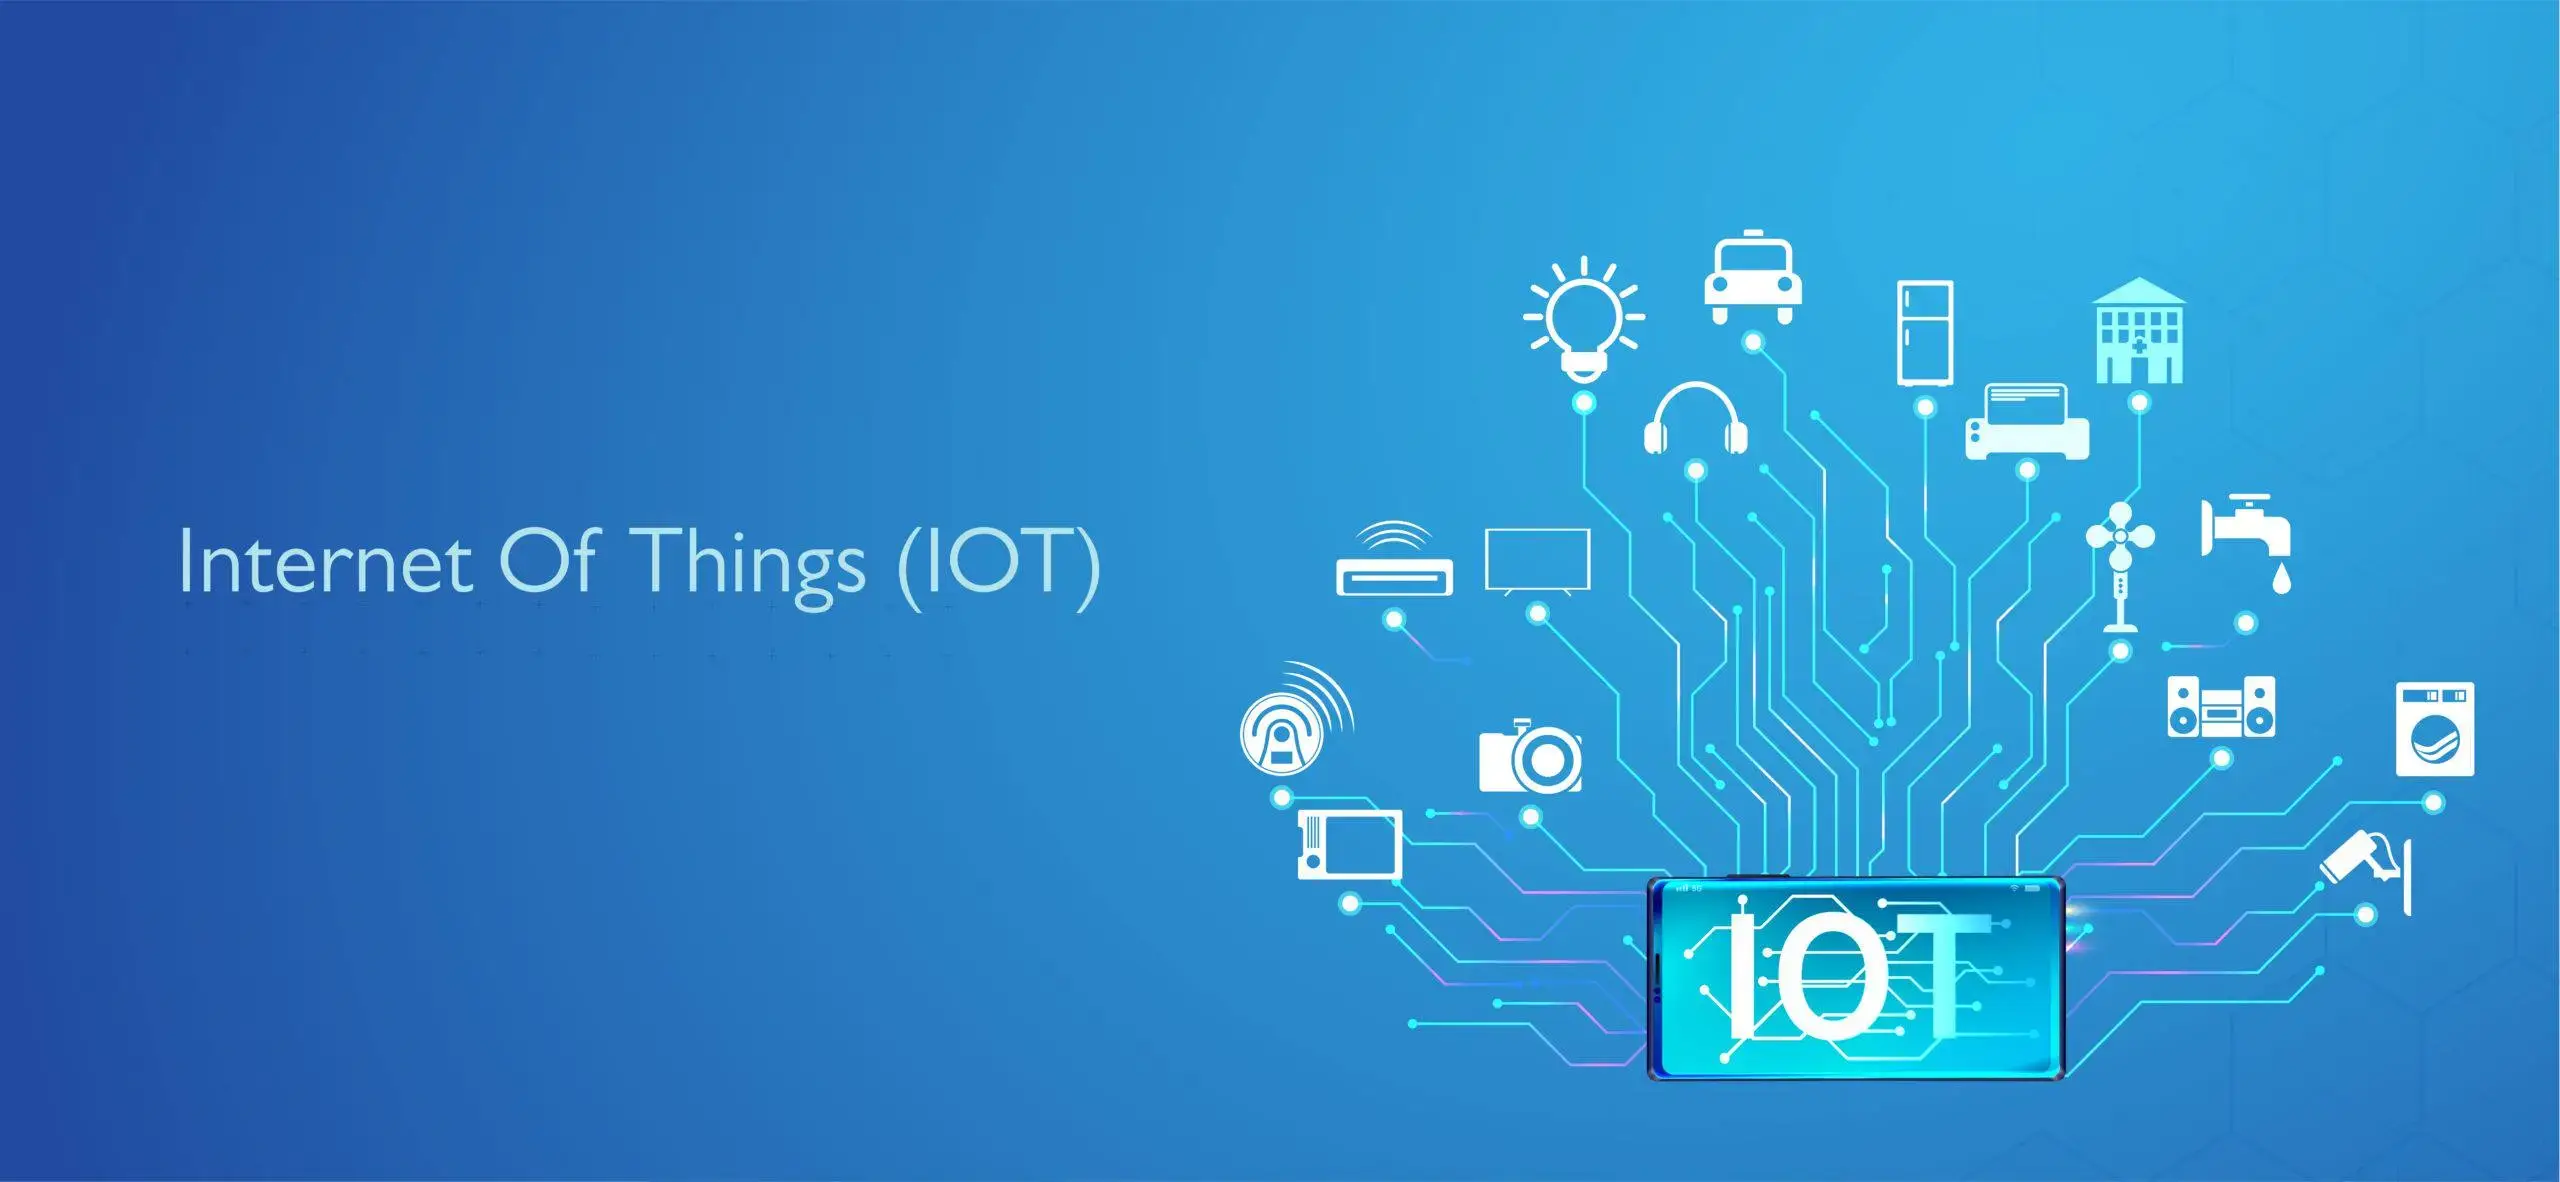 1711088895Quick Start Guide to Internet of Things (IoT).webp